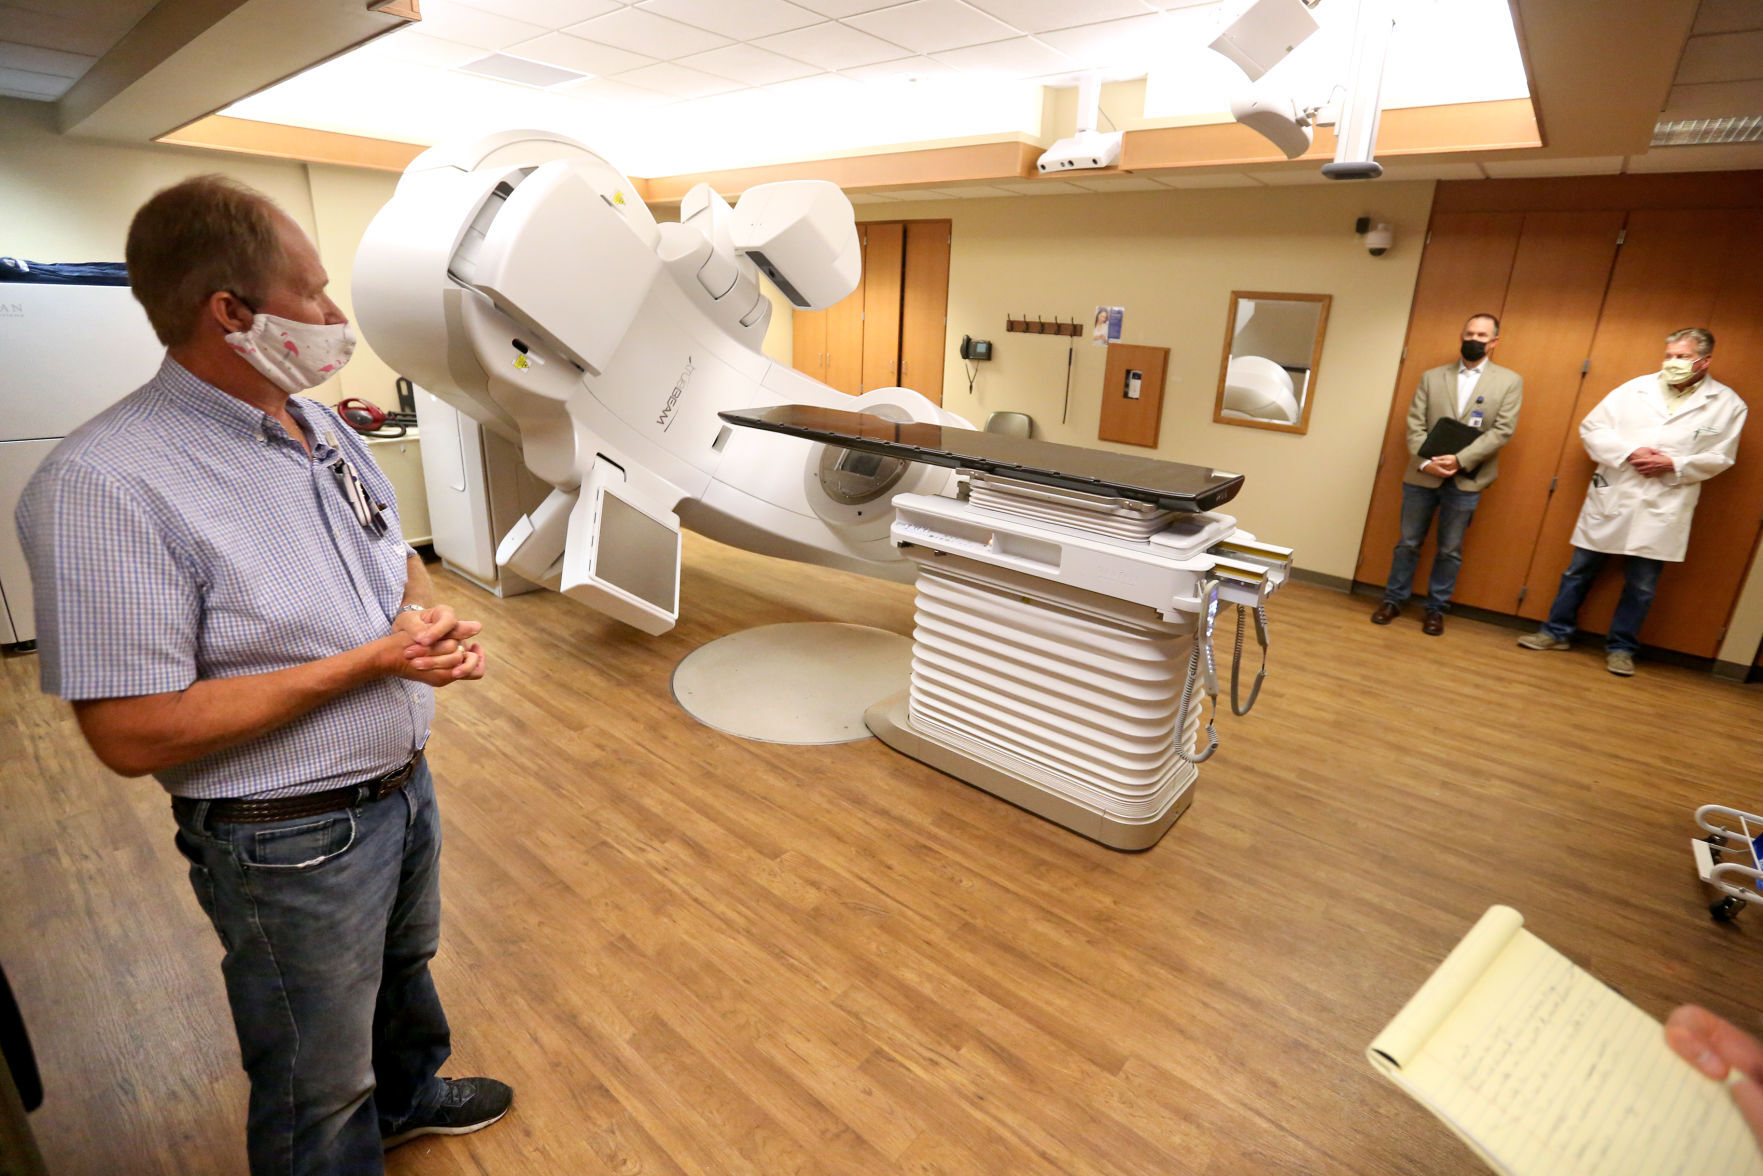 Mike Kelly, manager of oncology at Wendt Regional Cancer Center, discusses the linear accelerator at the new Integrated Cancer Center in Dubuque on Friday, Sept. 25, 2020. The center is a collaboration between UnityPoint Health-Finley Hospital and Grand River Medical Group and will be located on Finley